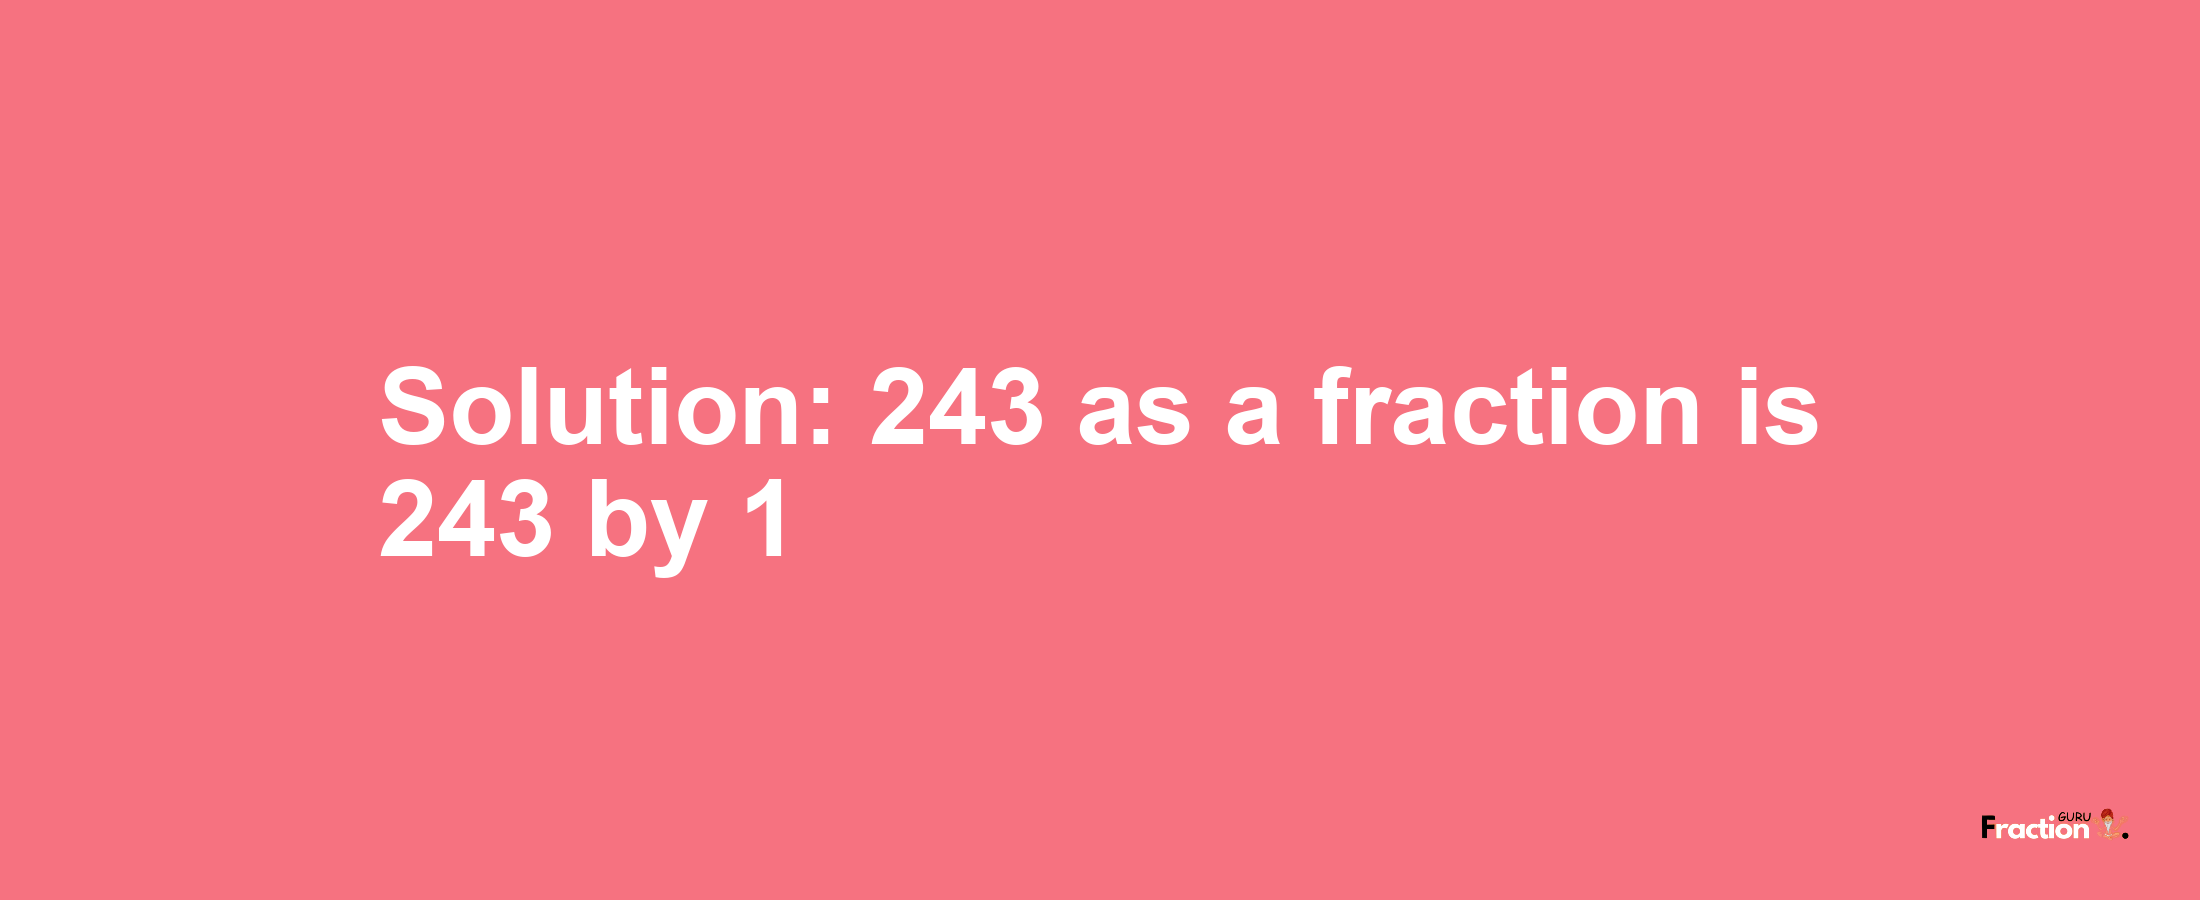 Solution:243 as a fraction is 243/1